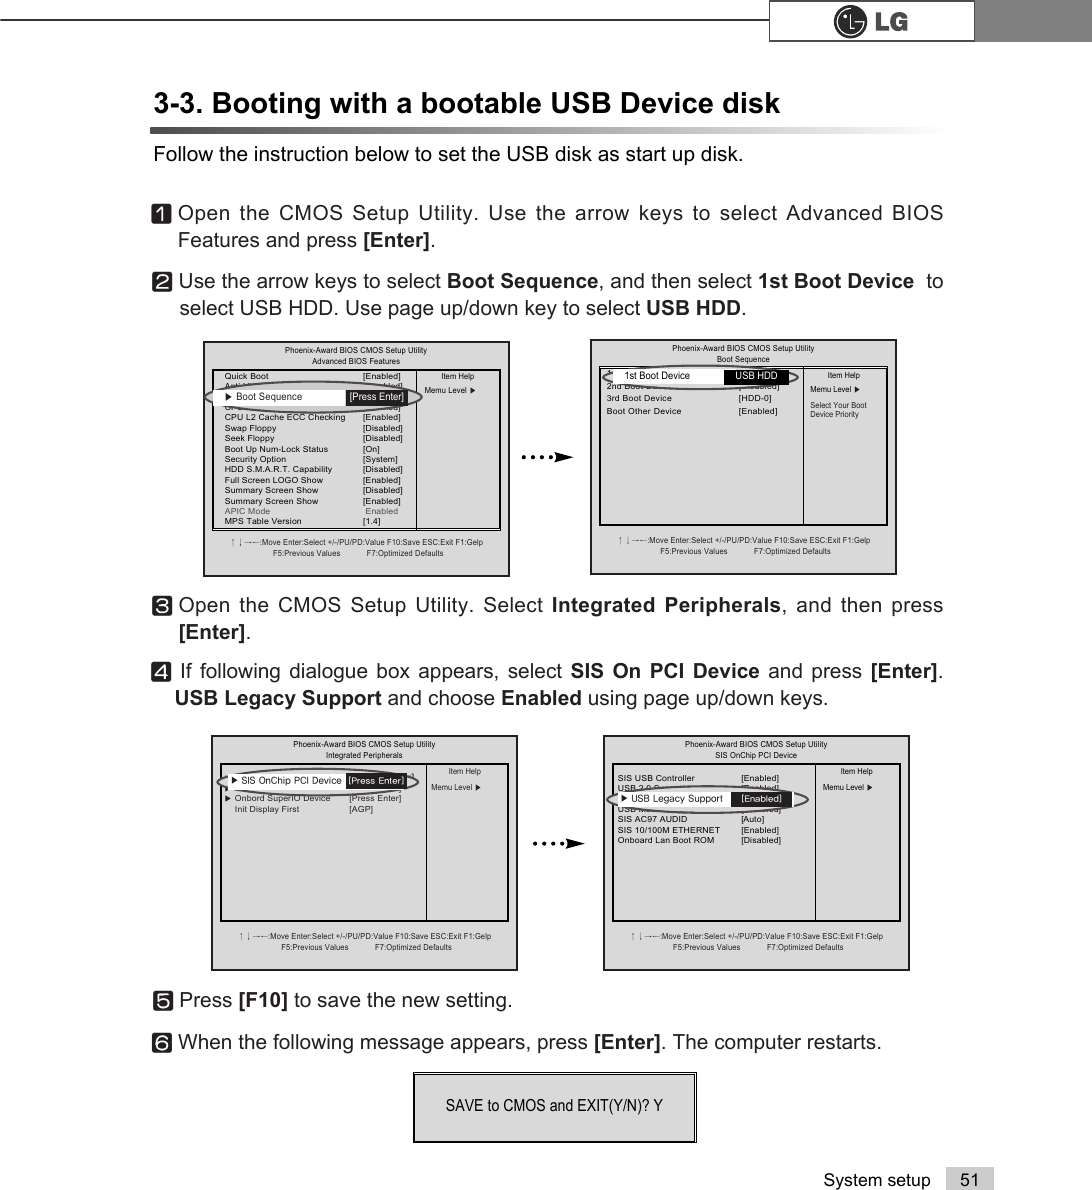 51System setup3-3. Booting with a bootable USB Device diskFollow the instruction below to set the USB disk as start up disk.ⓞOpen the CMOS Setup Utility. Use the arrow keys to select Advanced BIOSFeatures and press [Enter].ⓟUse the arrow keys to select Boot Sequence, and then select 1st Boot Device  toselect USB HDD. Use page up/down key to select USB HDD.ⓠOpen the CMOS Setup Utility. Select Integrated Peripherals, and then press[Enter].ⓡIf following dialogue box appears, select SIS On PCI Device and press [Enter].USB Legacy Support and choose Enabled using page up/down keys.Phoenix-Award BIOS CMOS Setup UtilityAdvanced BIOS Featuresêëèé:Move Enter:Select +/-/PU/PD:Value F10:Save ESC:Exit F1:GelpF5:Previous Values            F7:Optimized DefaultsQuick Boot  [Enabled]Anti-Virus Protection [Disabled]Boot Sequence [Press Enter]CPU L1&amp;L2 Cache [Enabled]CPU L2 Cache ECC Checking [Enabled]Swap Floppy  [Disabled]Seek Floppy  [Disabled]Boot Up Num-Lock Status [On]Security Option [System]HDD S.M.A.R.T. Capability  [Disabled]Full Screen LOGO Show [Enabled]Summary Screen Show [Disabled]Summary Screen Show [Enabled]APIC Mode EnabledMPS Table Version  [1.4]Item HelpMemu Level ĚPhoenix-Award BIOS CMOS Setup UtilityBoot Sequenceêëèé:Move Enter:Select +/-/PU/PD:Value F10:Save ESC:Exit F1:GelpF5:Previous Values            F7:Optimized Defaults1st Boot Device  [Enabled]2nd Boot Device [Disabled] 3rd Boot Device [HDD-0]Boot Other Device [Enabled]Item HelpMemu Level ĚSelect Your Boot Device Priority1st Boot Device  USB HDDĚBoot Sequence  [Press Enter]Phoenix-Award BIOS CMOS Setup UtilityIntegrated Peripheralsêëèé:Move Enter:Select +/-/PU/PD:Value F10:Save ESC:Exit F1:GelpF5:Previous Values            F7:Optimized DefaultsĚSIS OnChip IDE Device [Press Enter]ĚSIS OnChip PCI Device [Press Enter]ĚOnbord SuperIO Device [Press Enter]Init Display First [AGP]Item HelpMemu Level ĚĚ 6,62Q&amp;KLS3&amp;,&apos;HYLFH&gt;3UHVV(QWHU@ⓢPress [F10] to save the new setting.ⓣWhen the following message appears, press [Enter]. The computer restarts.SAVE to CMOS and EXIT(Y/N)? Y Phoenix-Award BIOS CMOS Setup UtilitySIS OnChip PCI Deviceêëèé:Move Enter:Select +/-/PU/PD:Value F10:Save ESC:Exit F1:GelpF5:Previous Values            F7:Optimized DefaultsSIS USB Controller  [Enabled]USB 2.0 Supports [Enabled]USB Legacy Support [Disabled]USB Mouse Support [Disabled]SIS AC97 AUDID [Auto]SIS 10/100M ETHERNET [Enabled]Onboard Lan Boot ROM [Disabled]Item HelpMemu Level ĚĚ 86%/HJDF\6XSSRUW&gt;(QDEOHG@